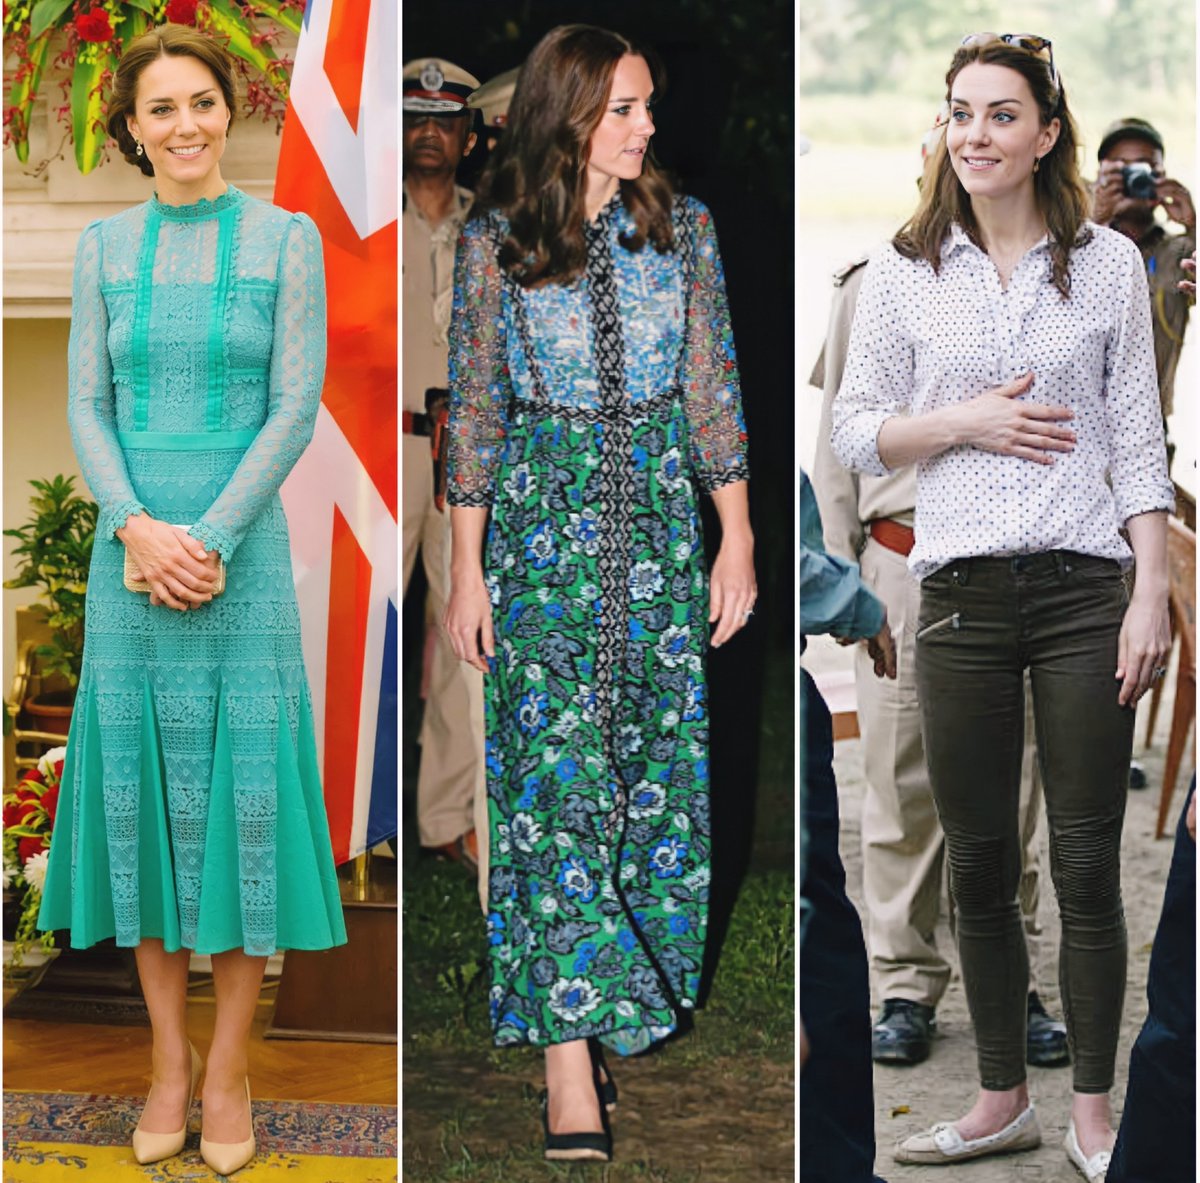 3 amazing outfits worn by Princess Catherine during the Royal Tour of India and Bhutan in 2016.
#PrincessofWales #PrincessCatherine #CatherinePrincessOfWales #TeamCatherine #TeamWales #RoyalFamily #IStandWithCatherine #CatherineWeLoveYou #CatherineIsQueen